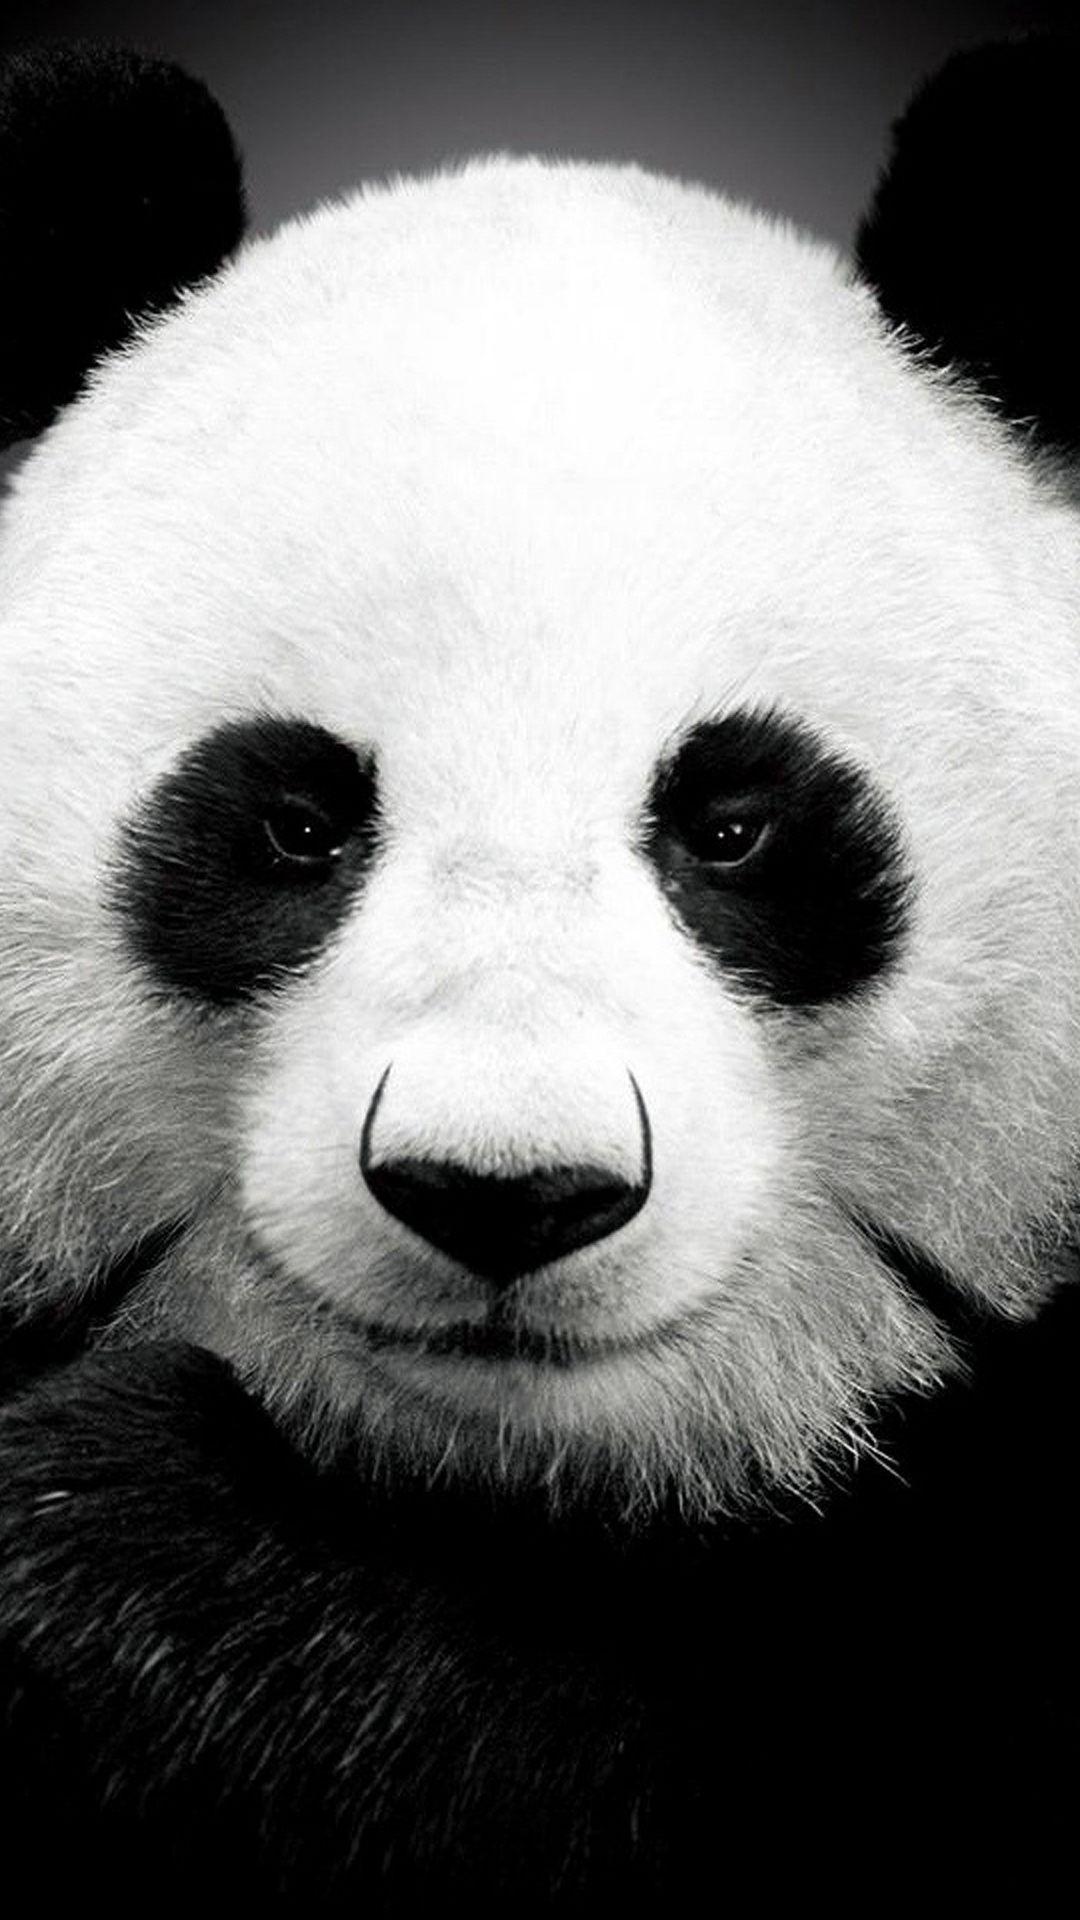 Panda bear htc one wallpaper, free and easy to download